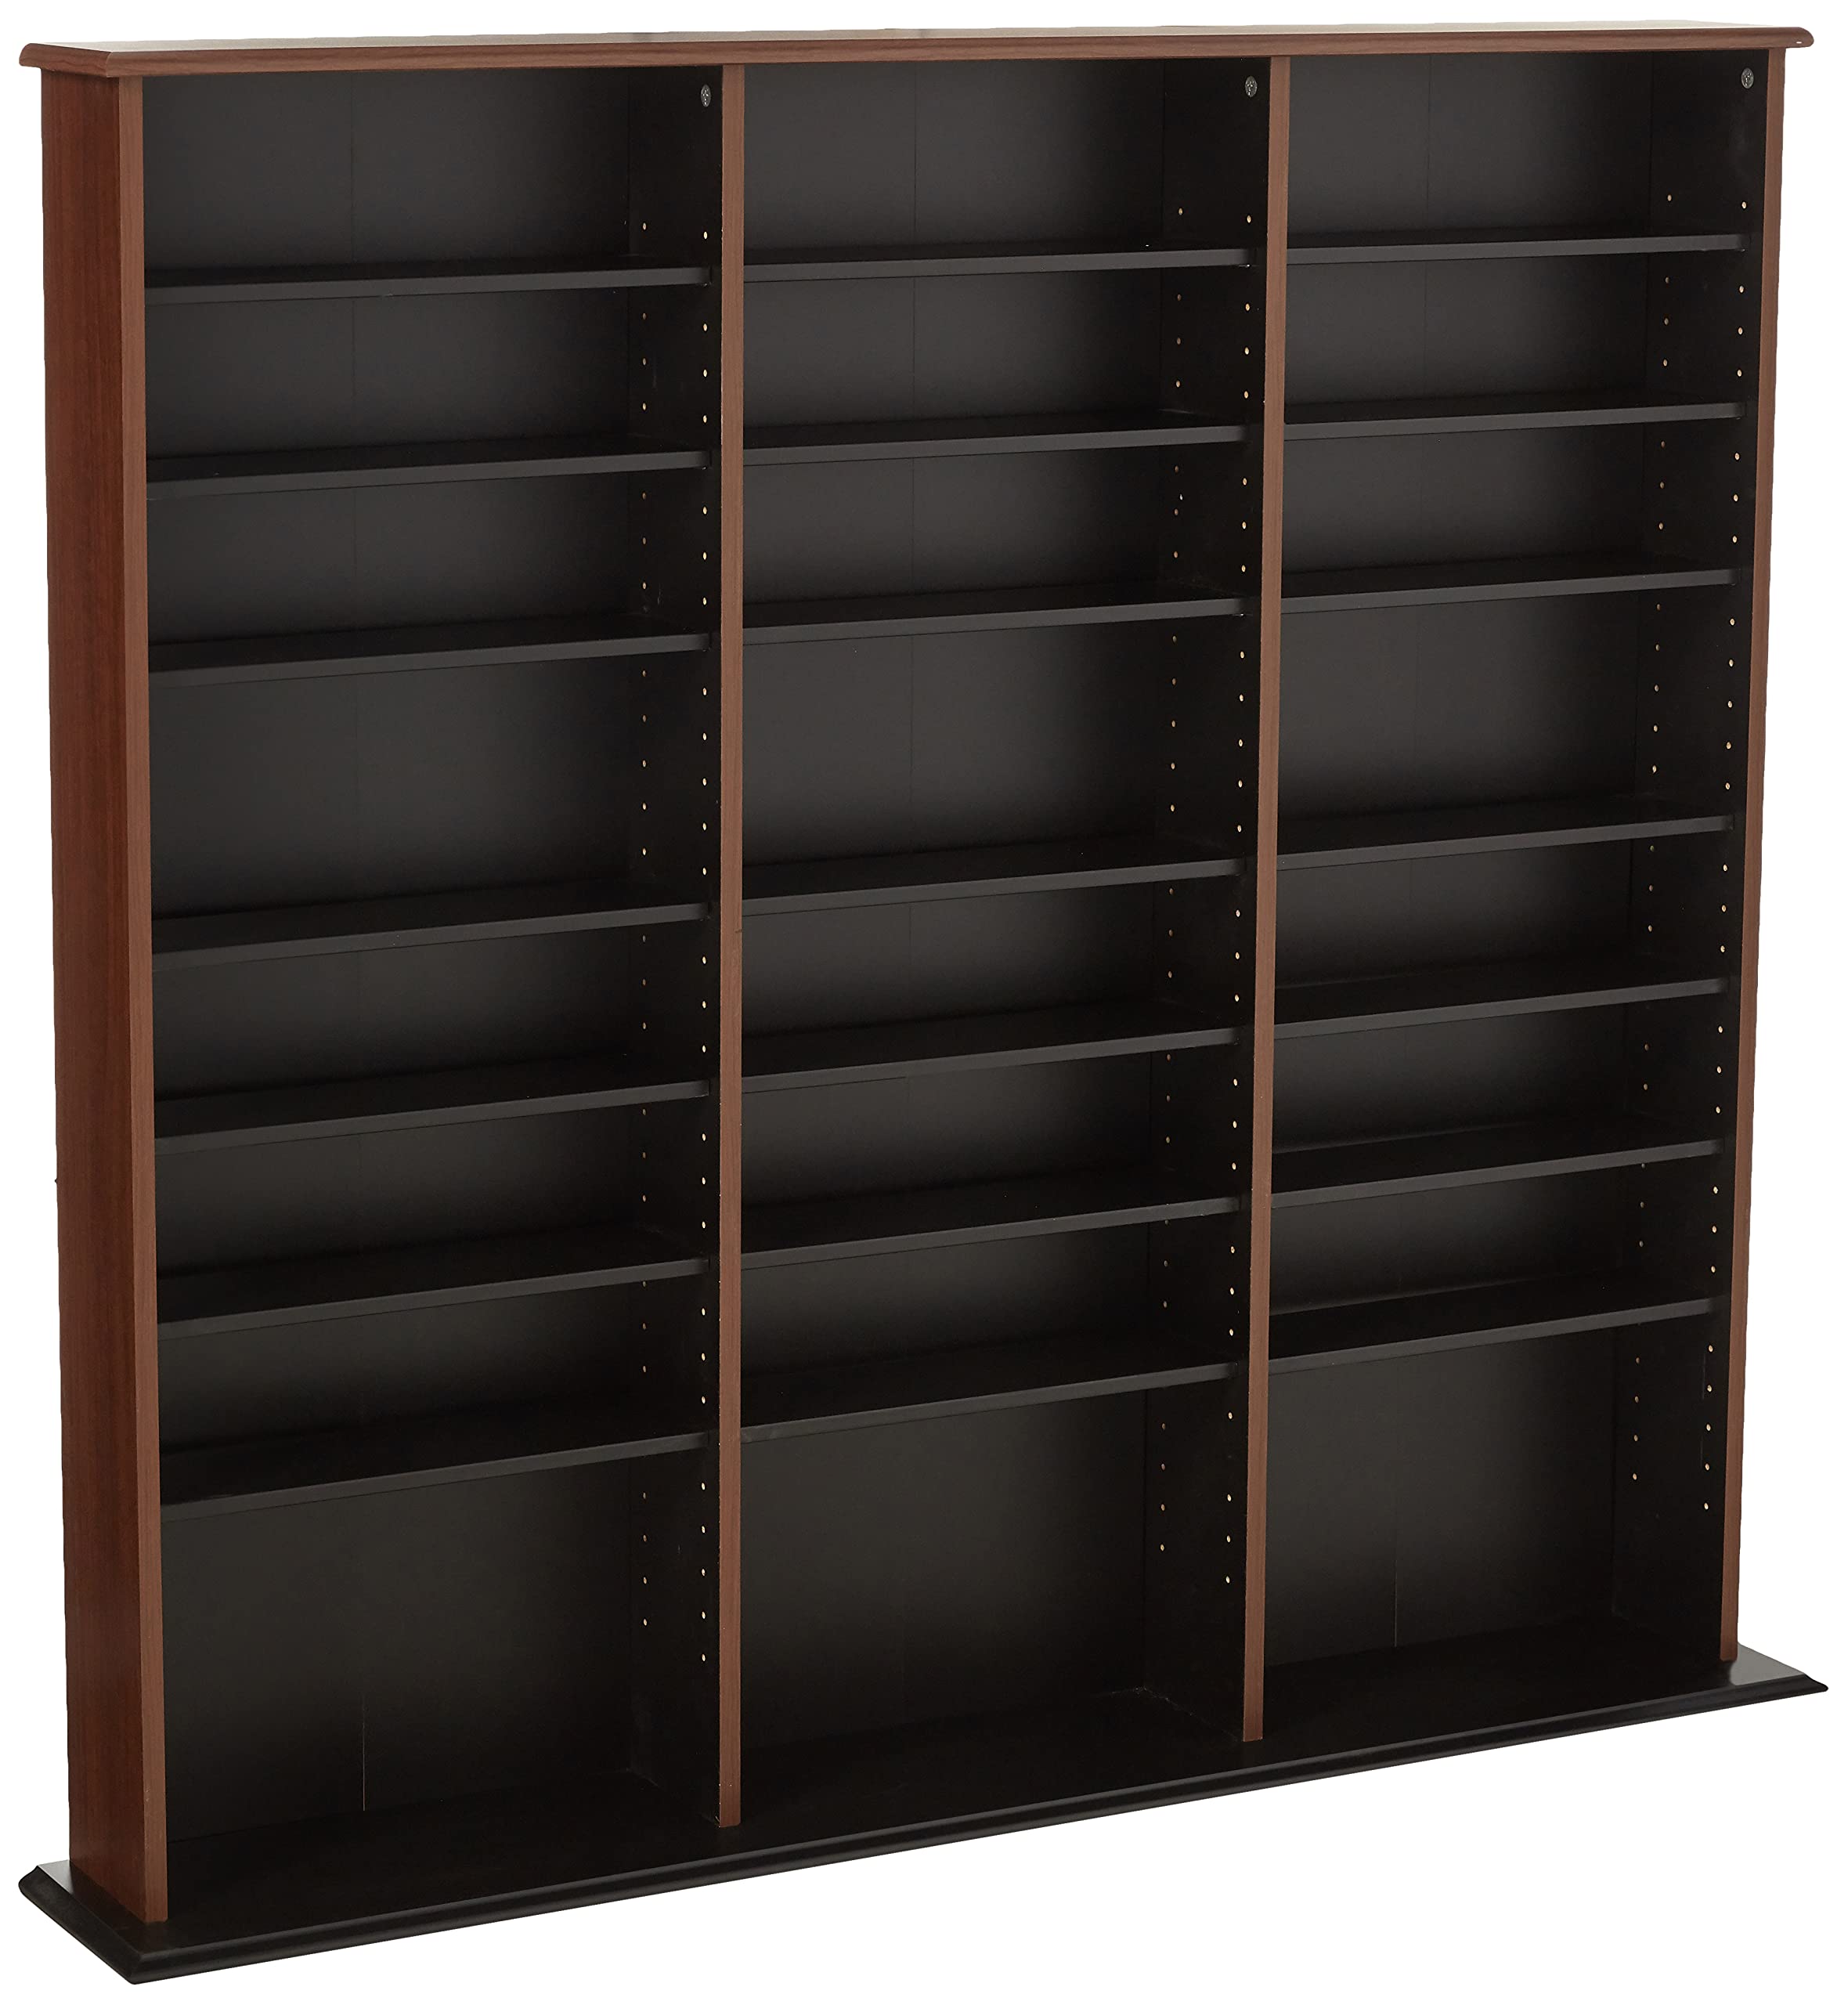 Prepac Triple Width Wall Storage Cabinet, Cherry and Bl...